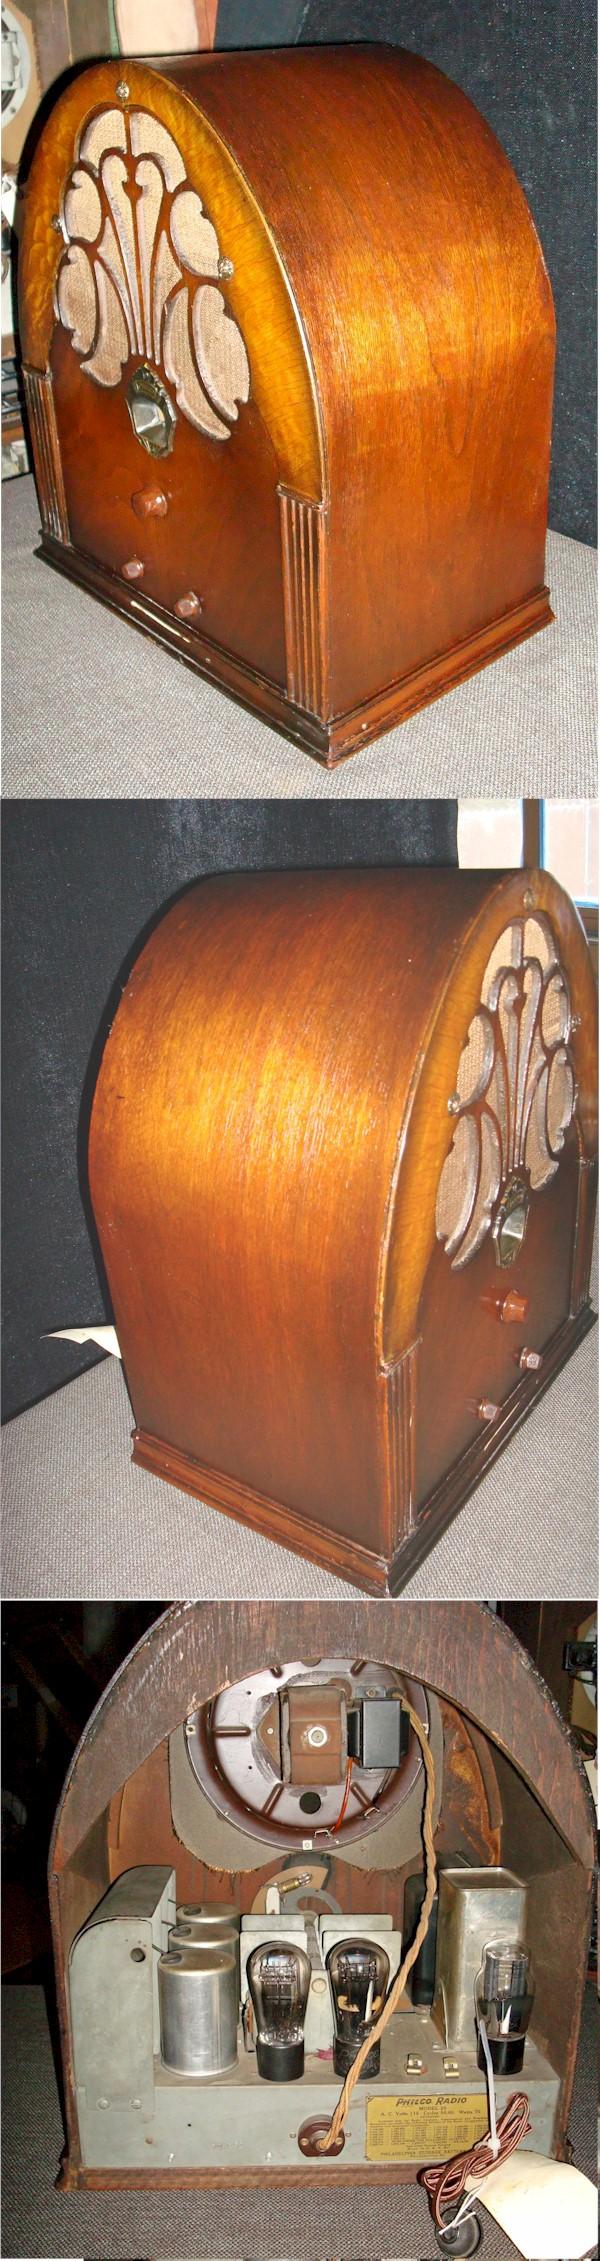 Philco 20 Deluxe Cathedral (1930)